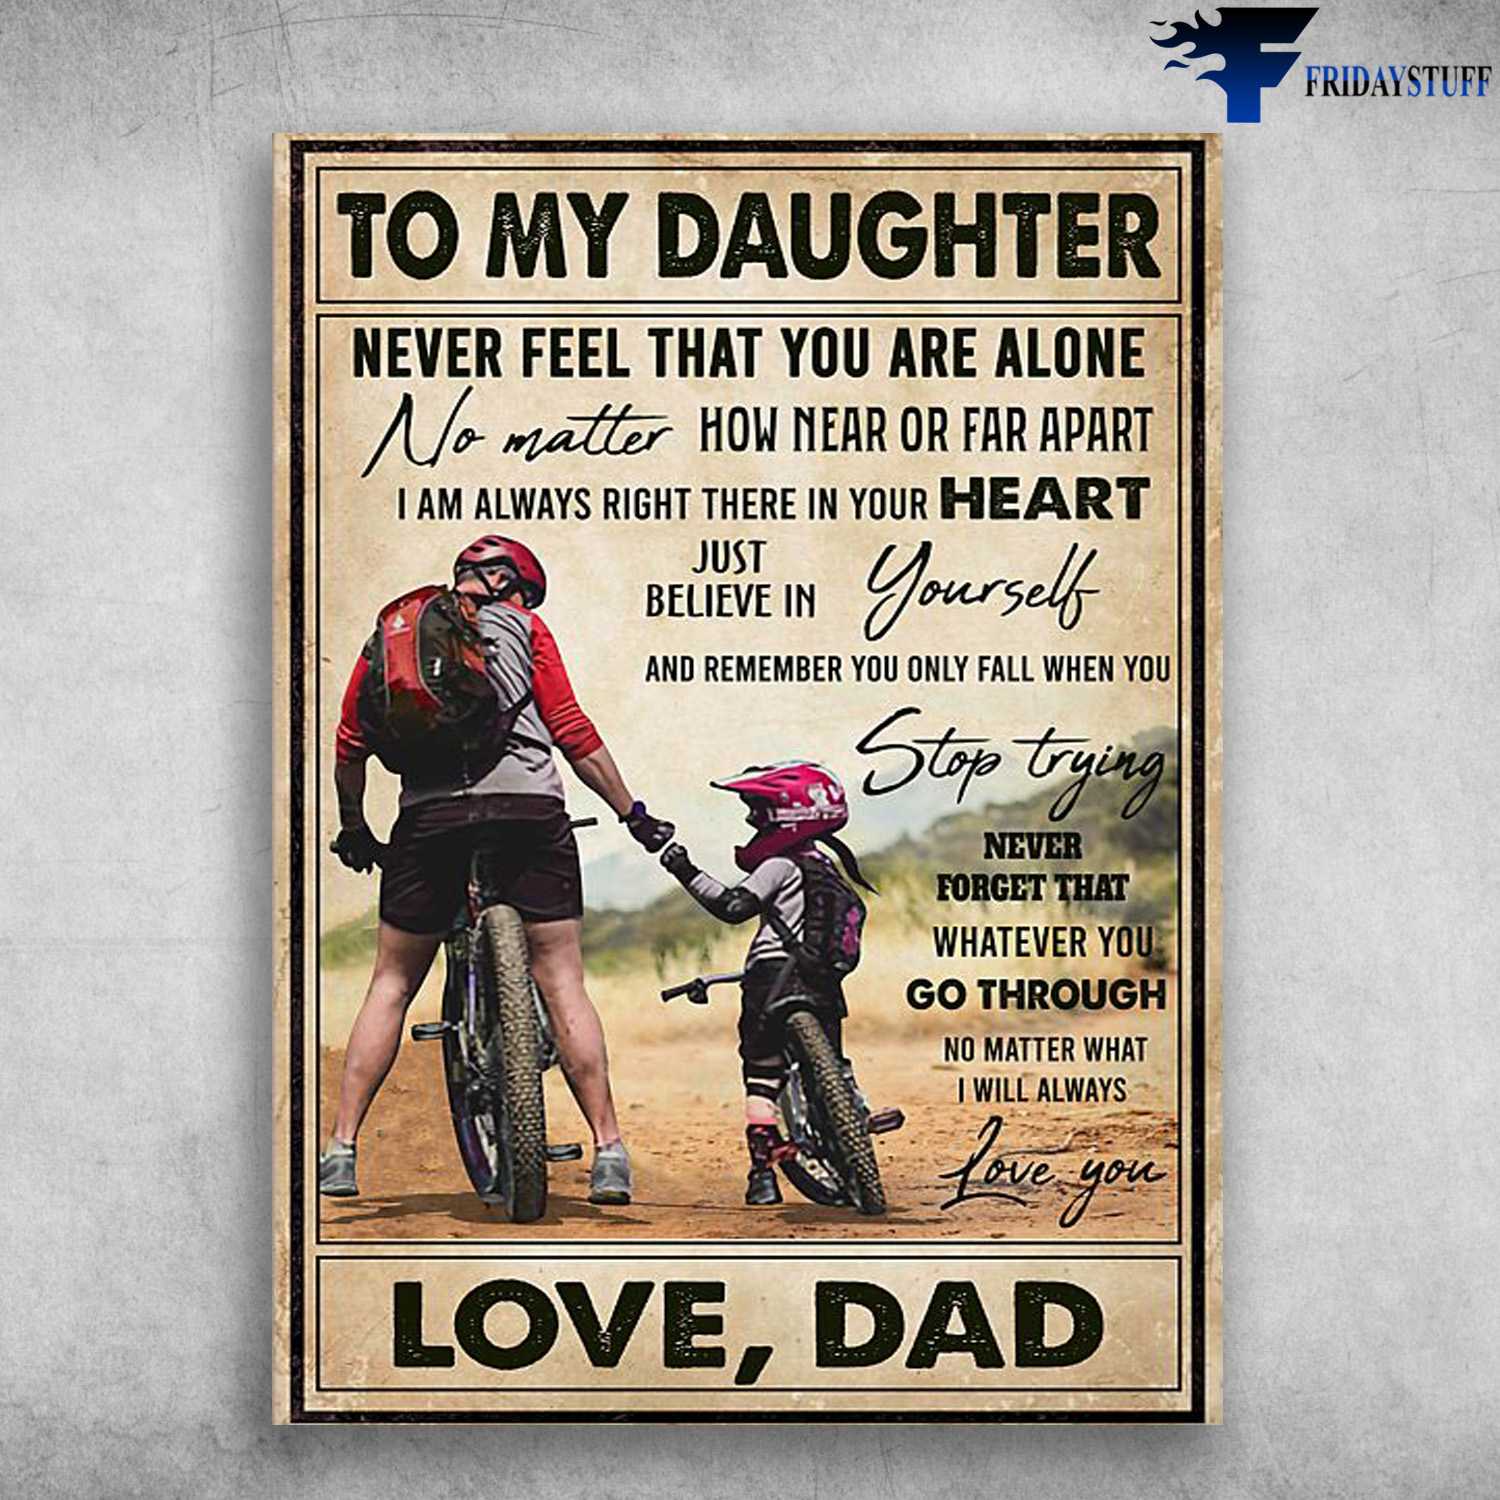 Dad And Daughter, Cycling With Daughter, To My Daughter, Never Feel That, You Are Alone, No Matter How Near Or Far Apart, I Am Always Right There Is Your Heart, Just Believe In Yourself